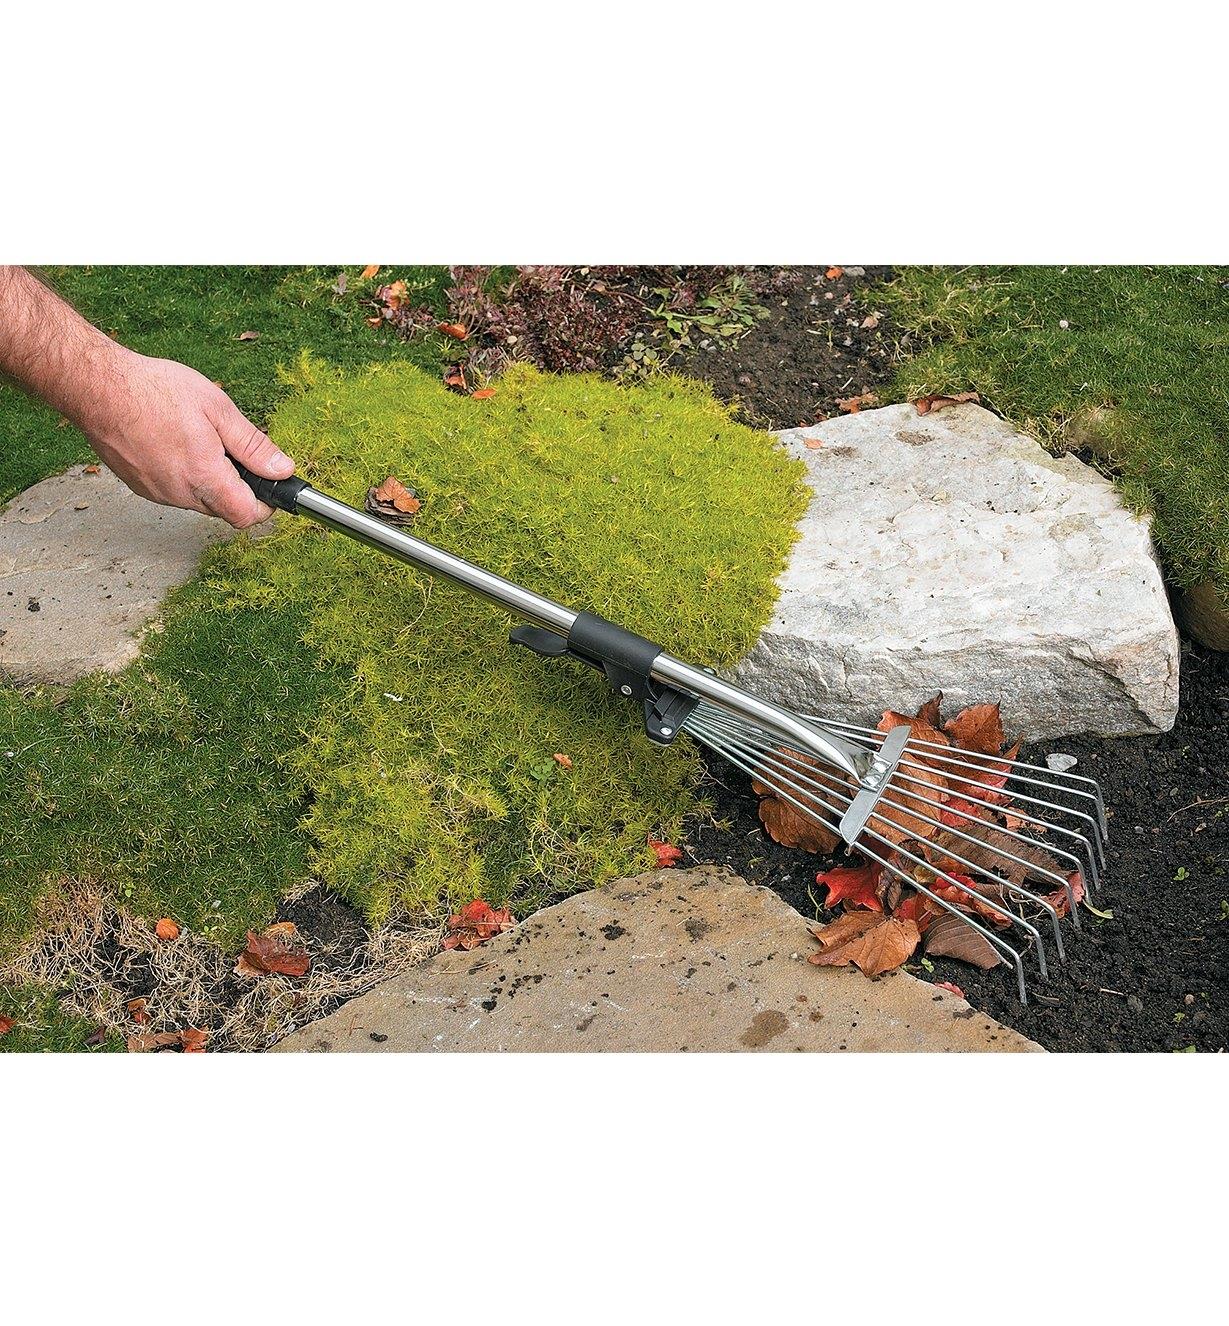 Using the Short-Handled Rake to clear fallen leaves between rocks in a garden